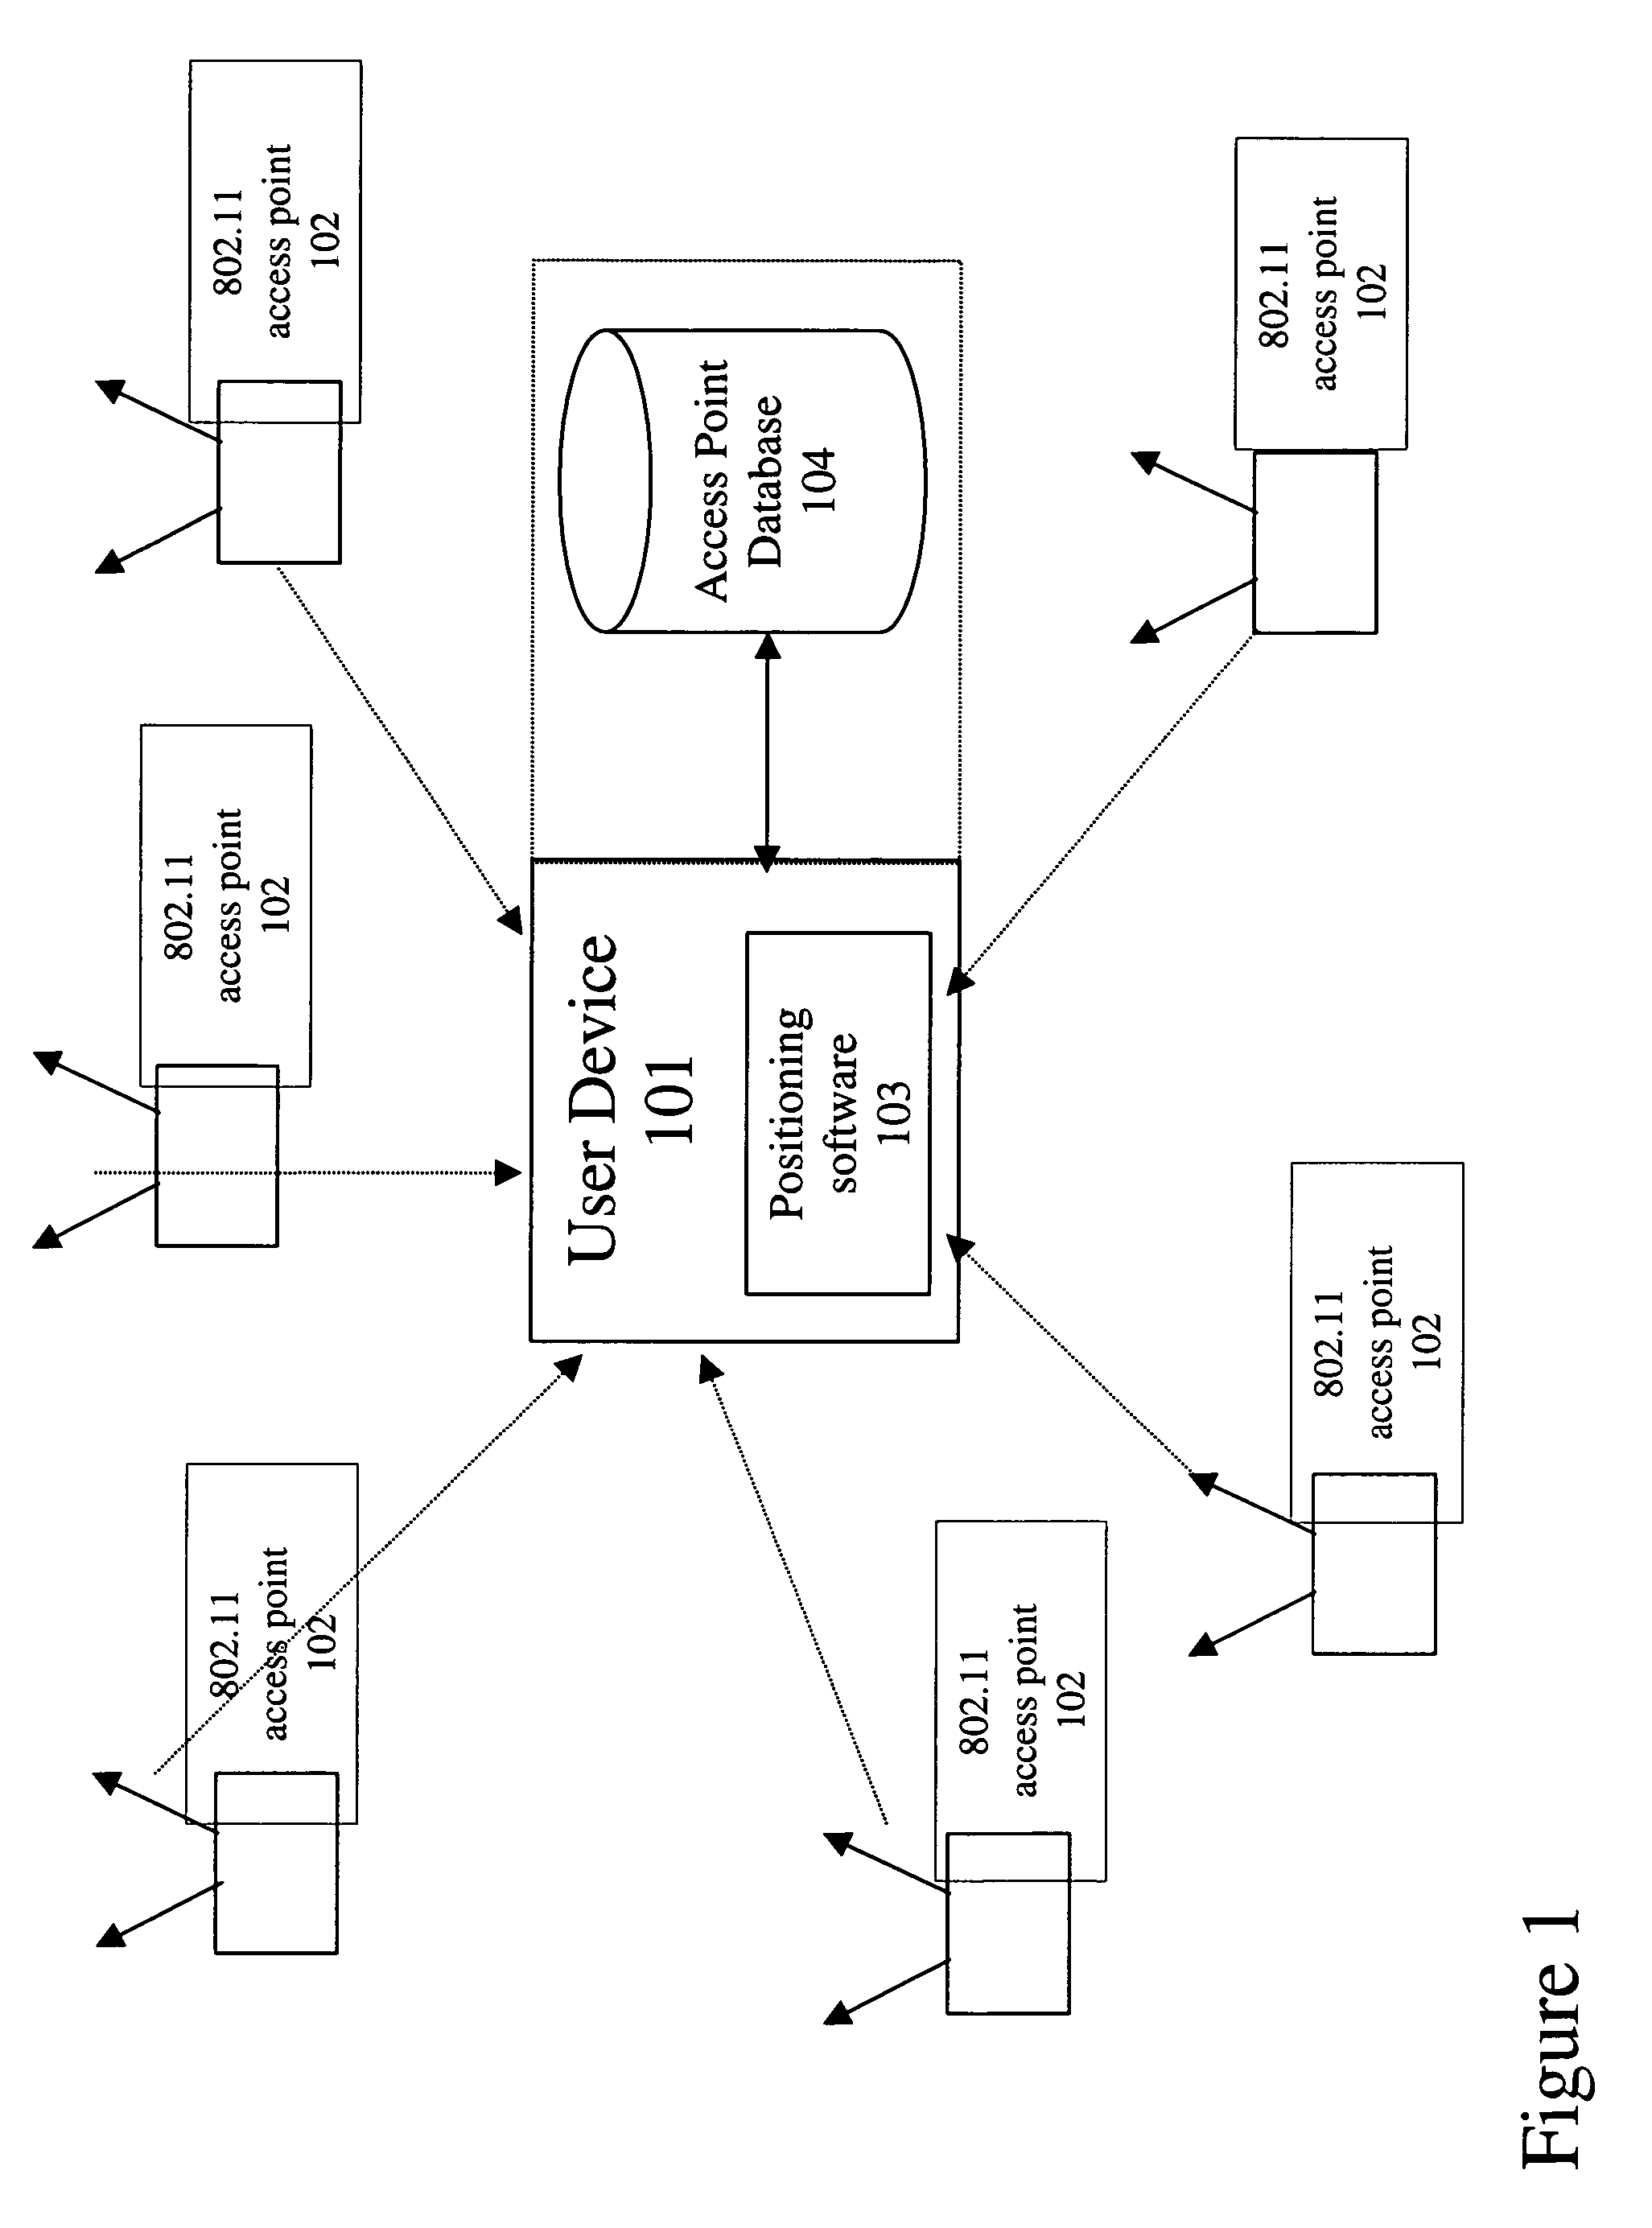 Encoding and compression of a location beacon database